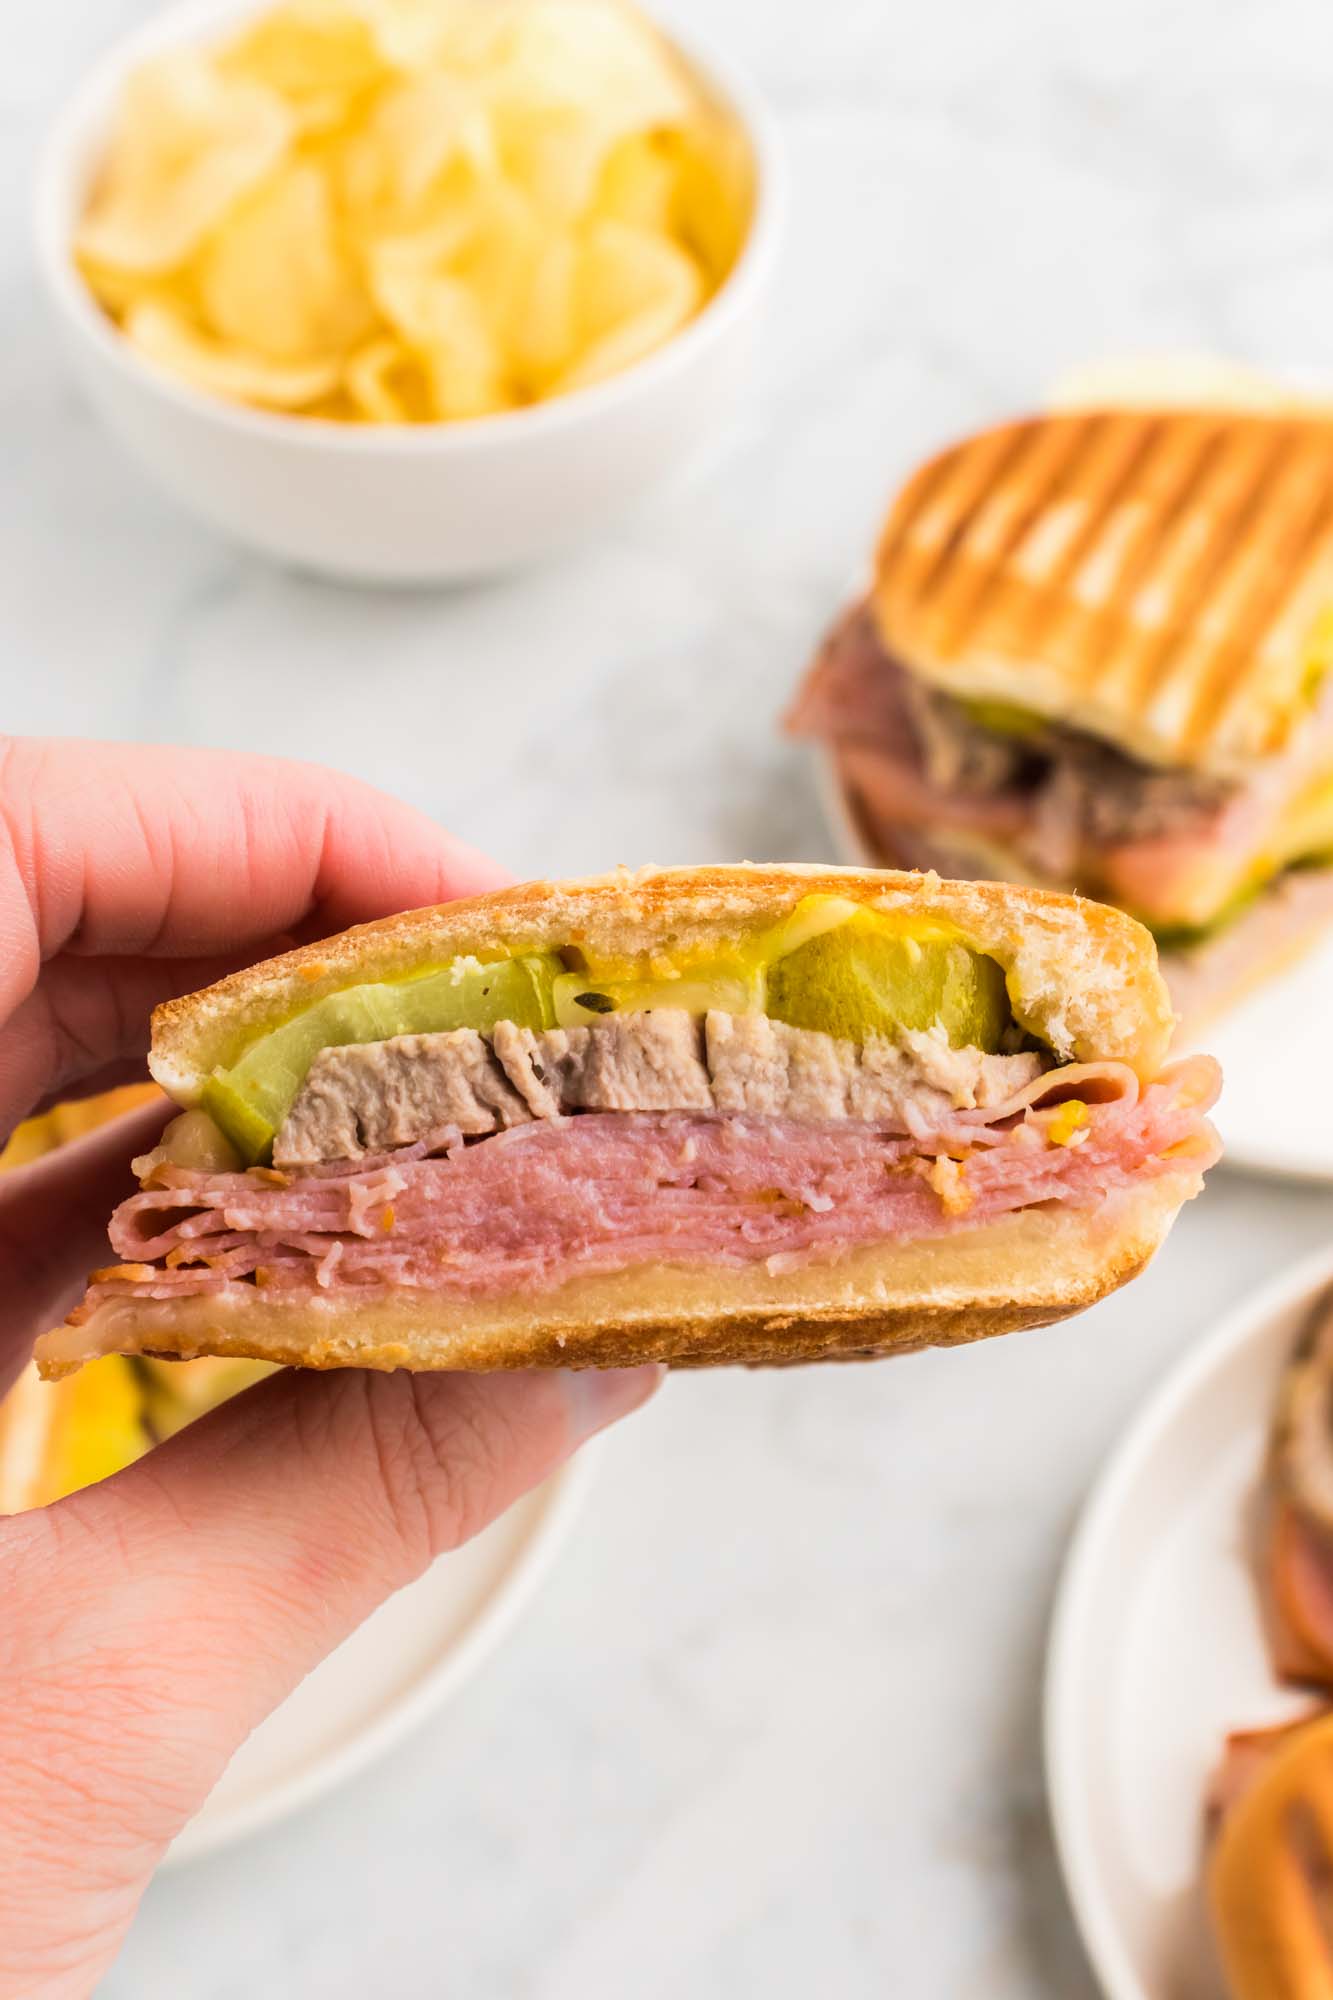 Holding a Cuban sandwich to show the layers